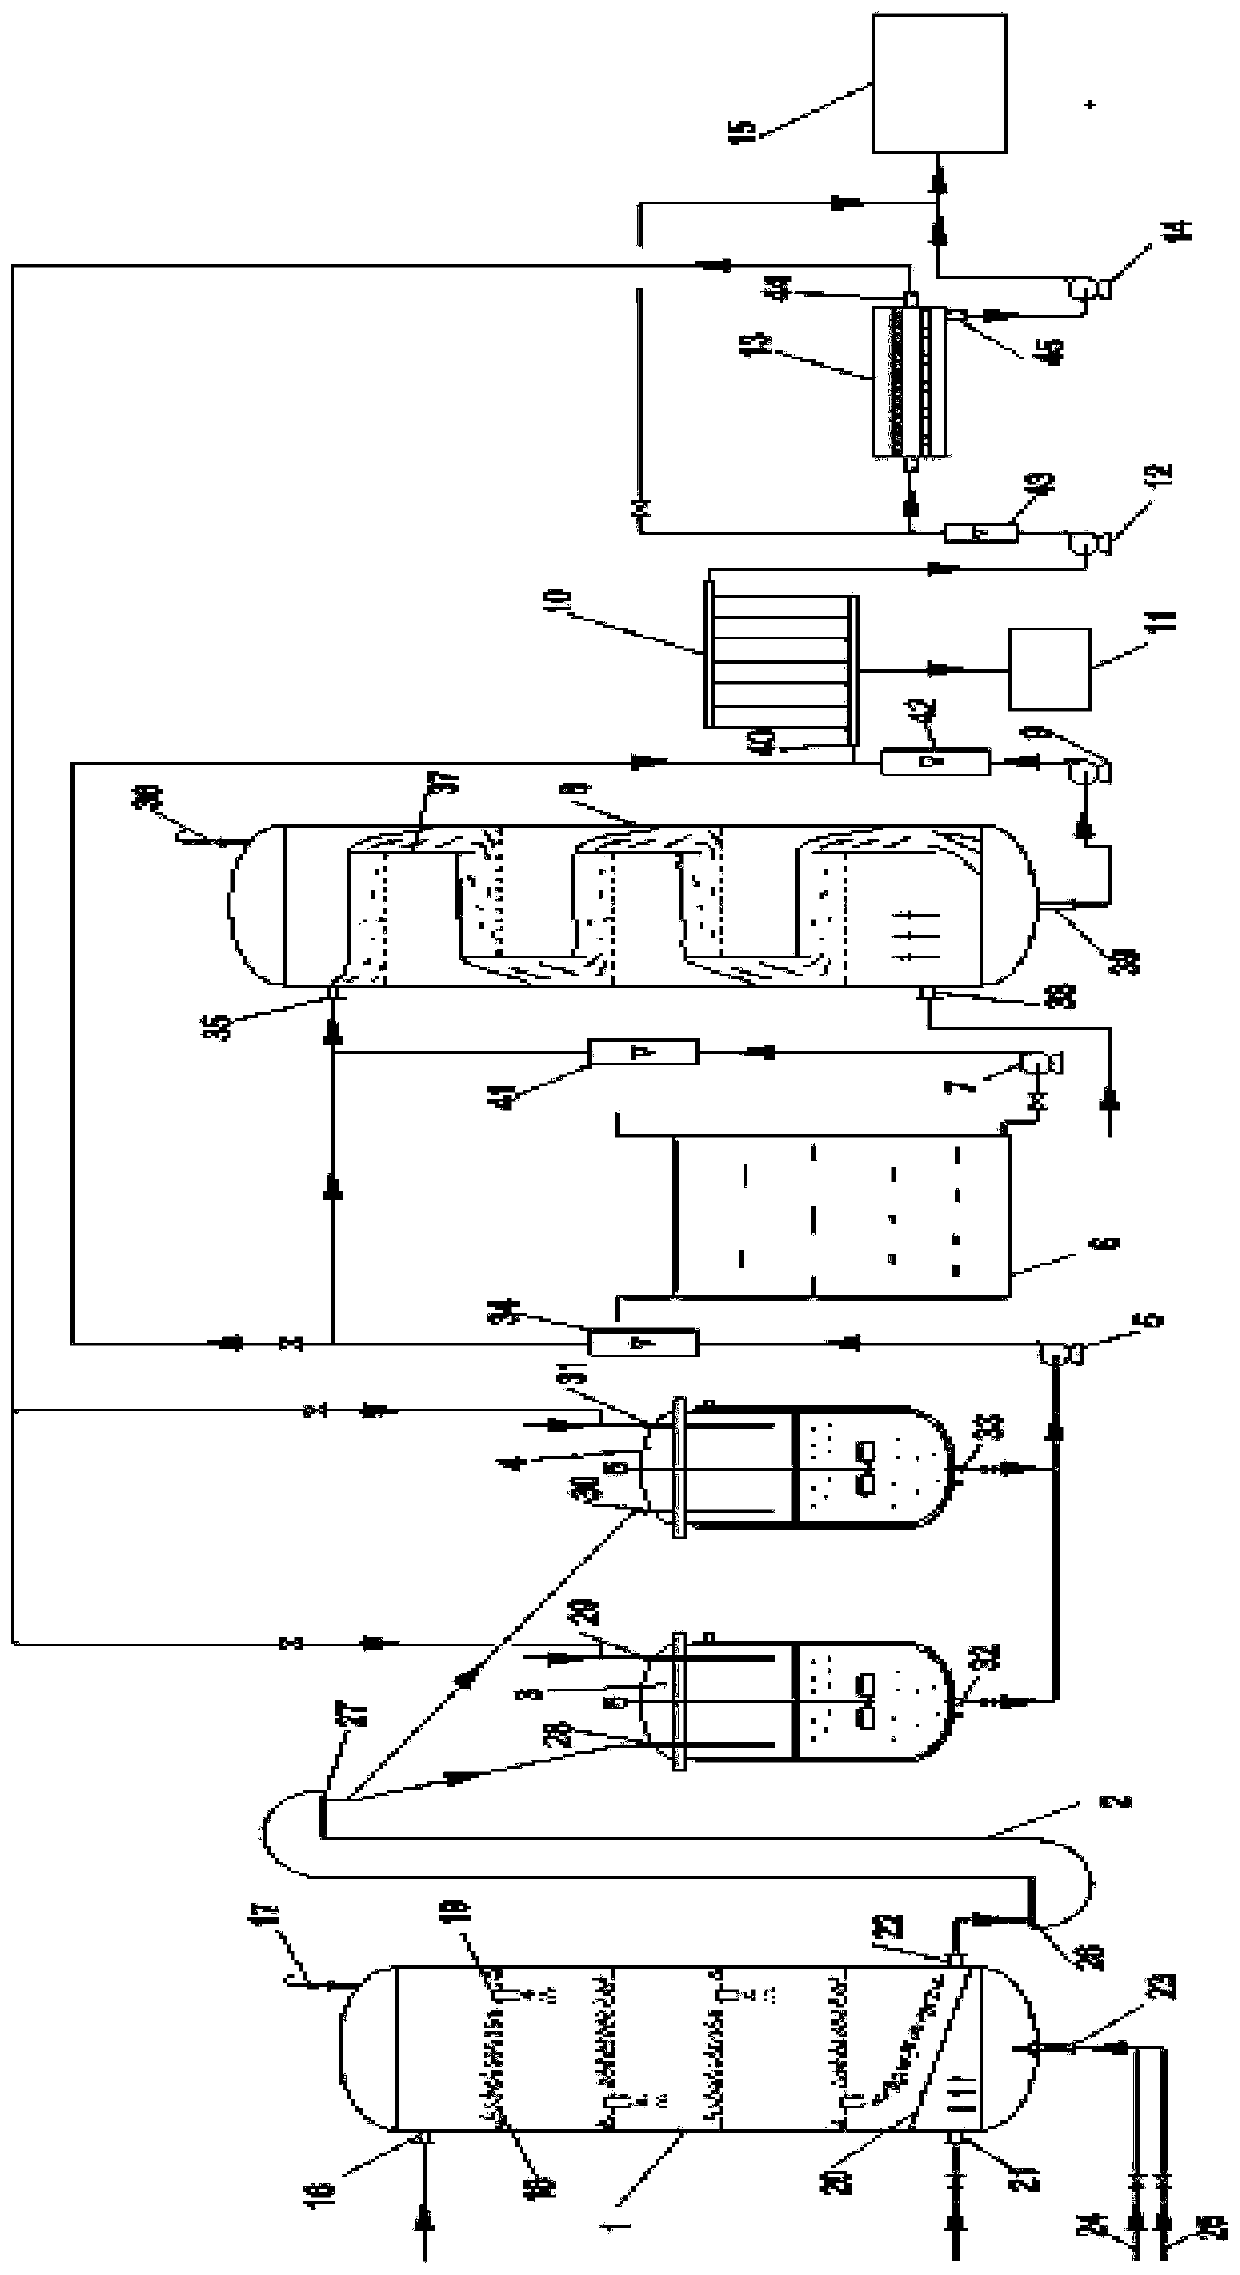 Device used for removing organic impurities in by-product sodium chloride in chlorine chemical process